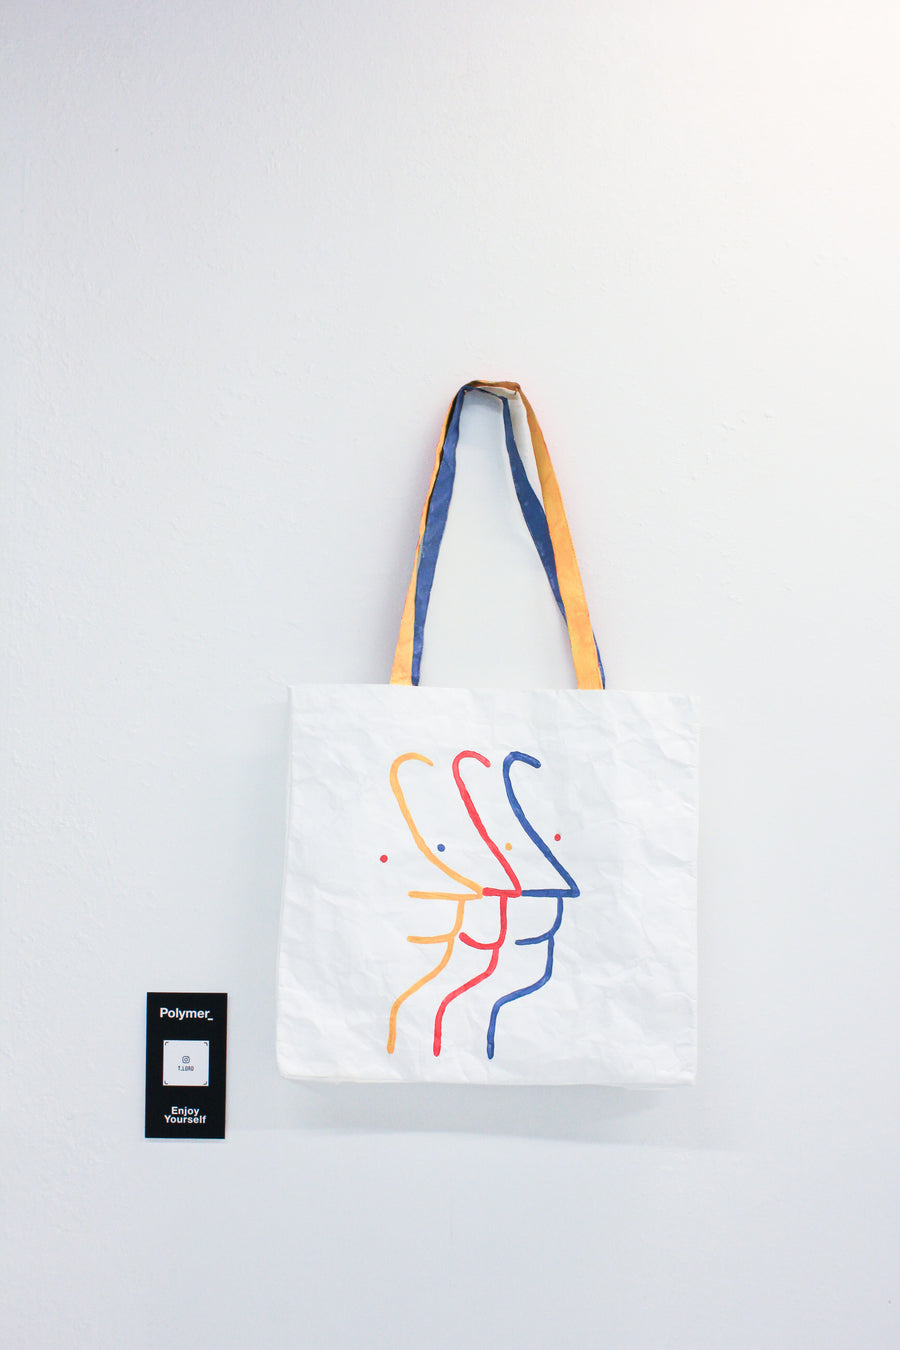 Polymer_ Enjoy Yourself Art Tote by Taylor Mousaw